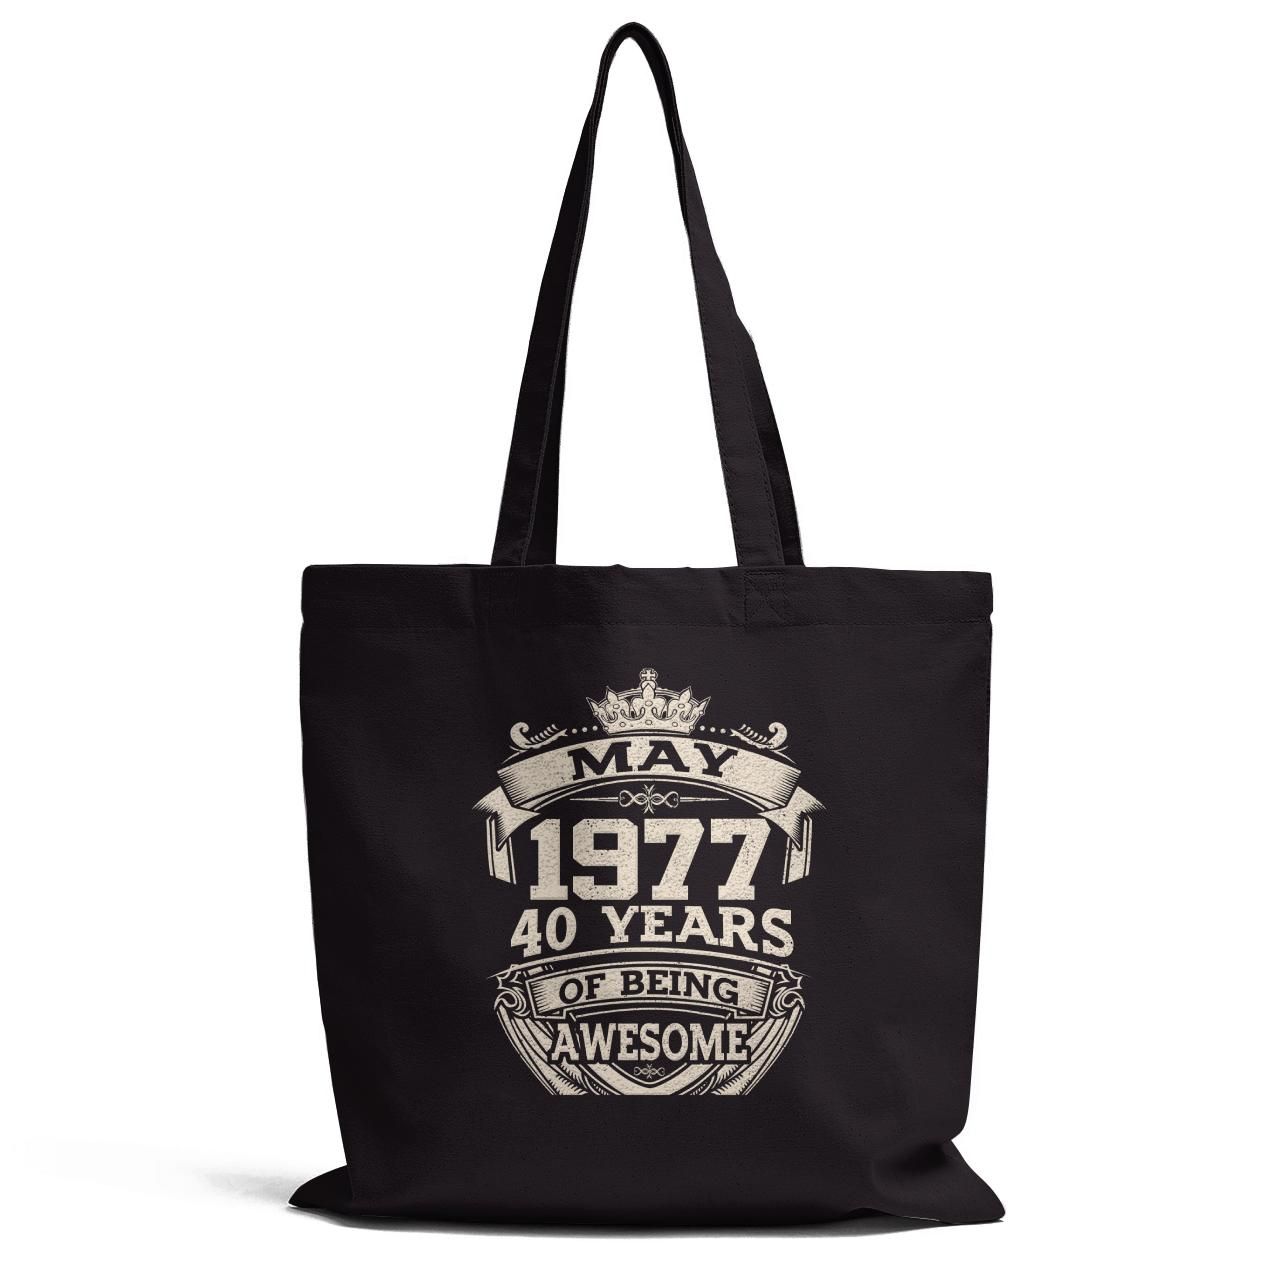 May 1977 40 Years Of Being Awesome Tote Bag